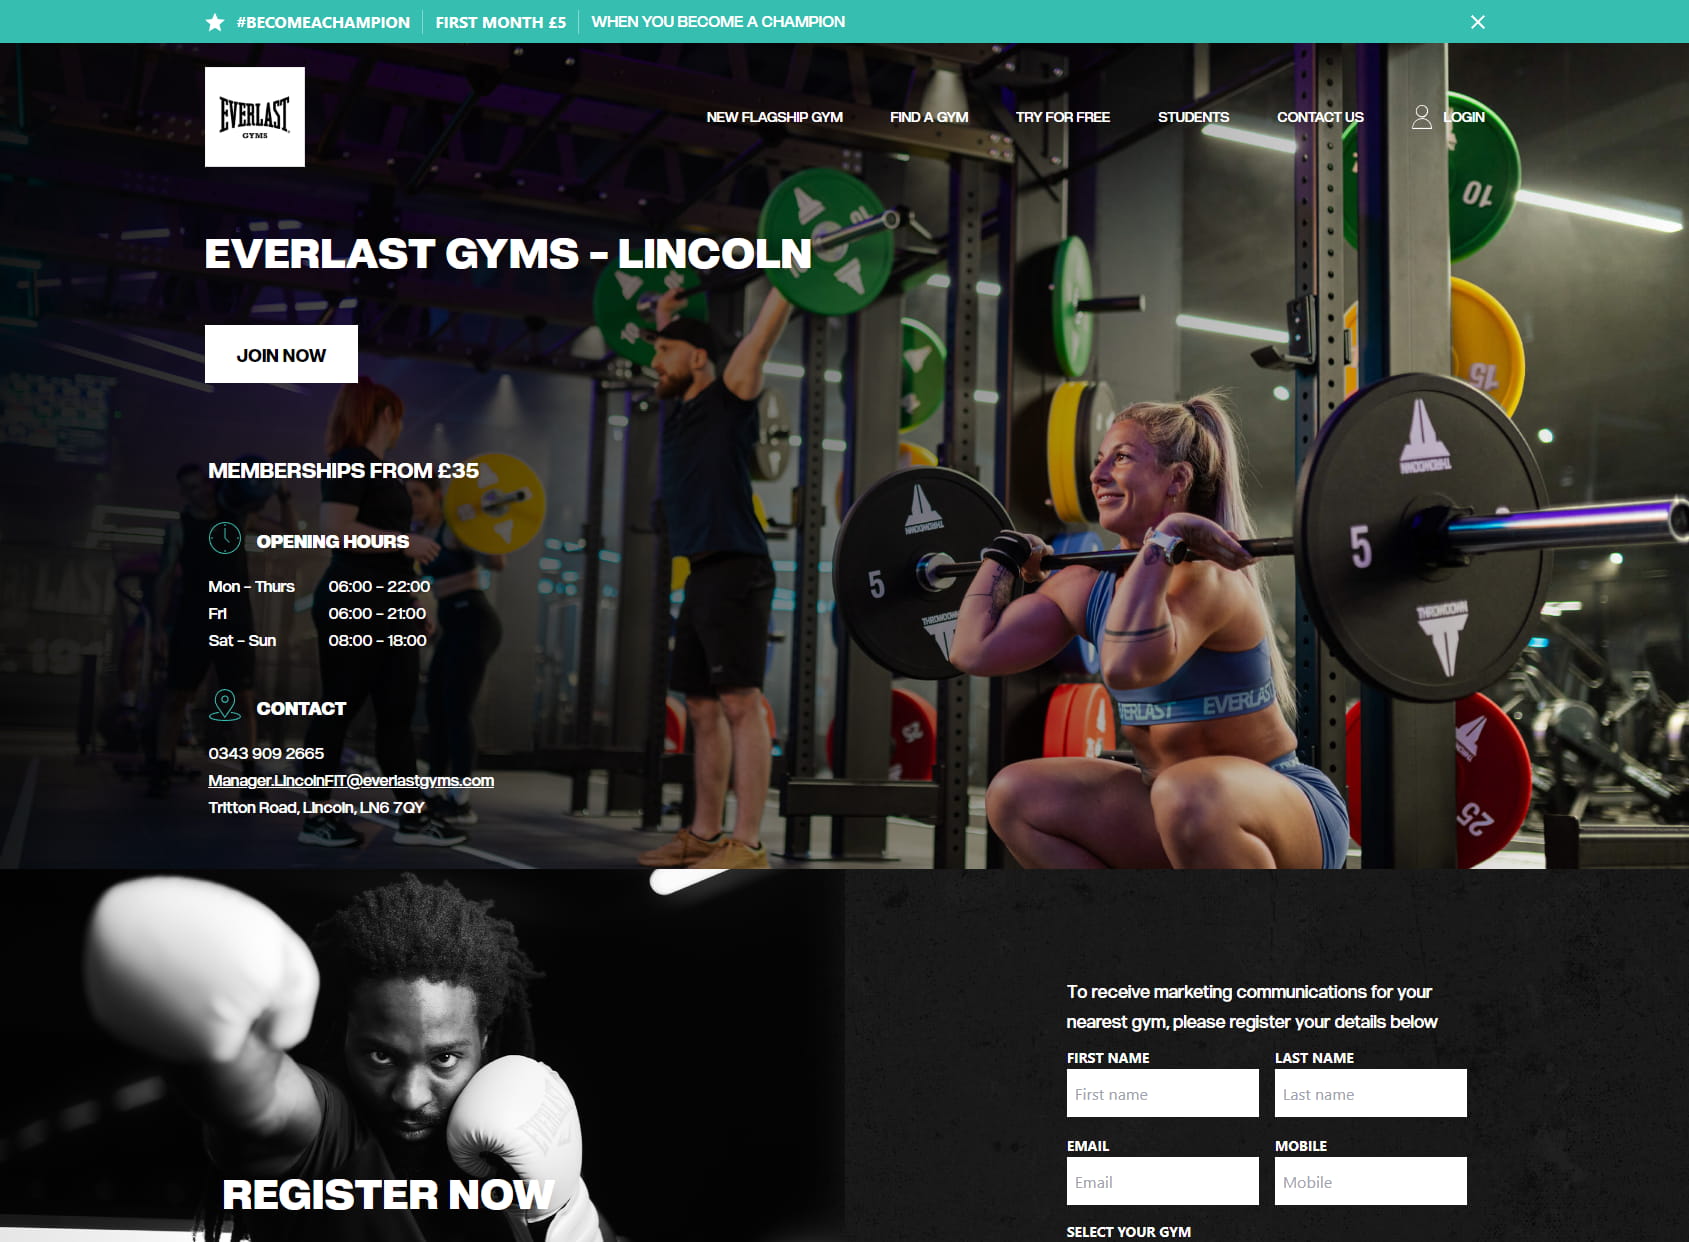 Everlast Gyms - Lincoln